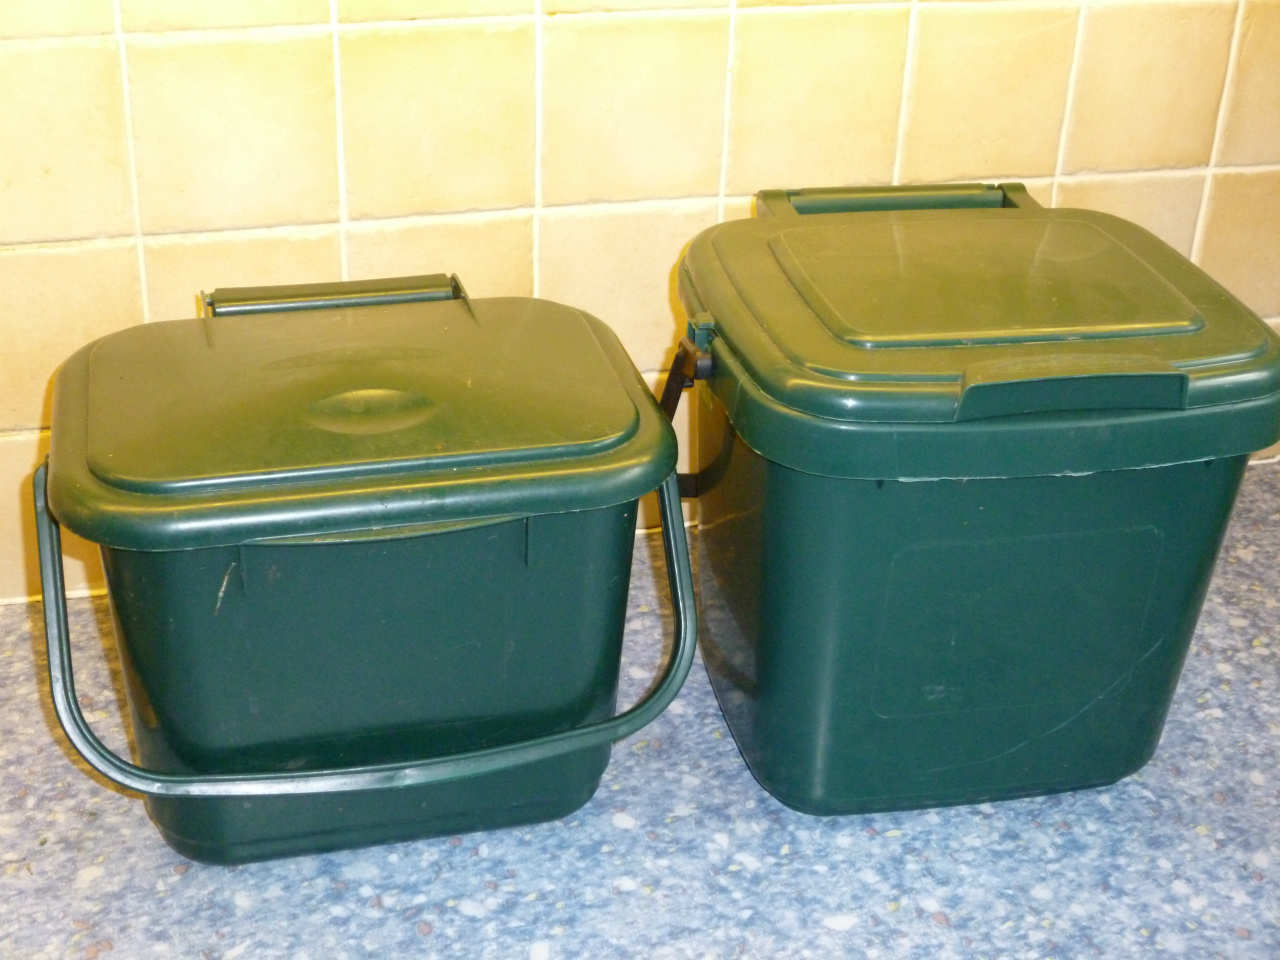 Biodegradeable Liners for Garland 9L Kitchen Compost Caddy Bin 2 pack sizes 